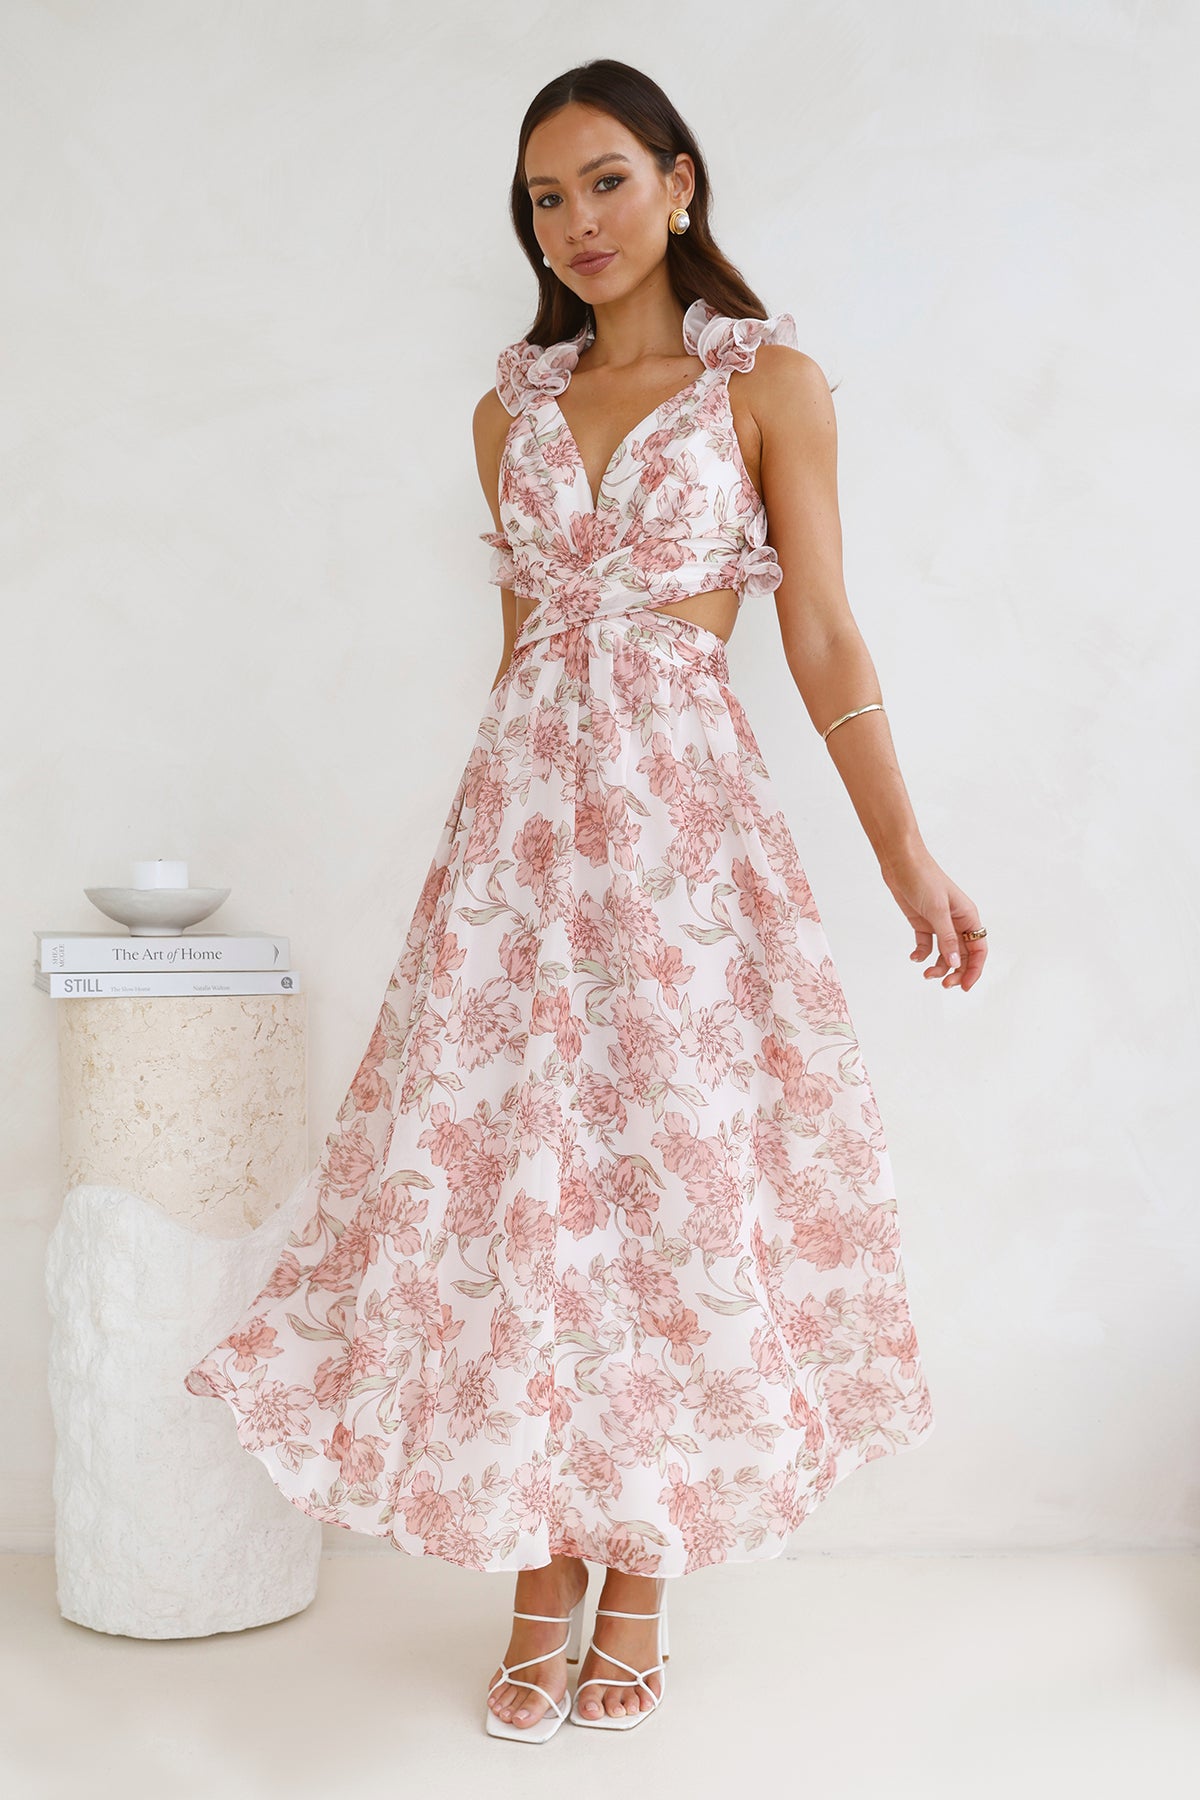 Shop Formal Dress - Extra Guest Maxi Dress Pink featured image